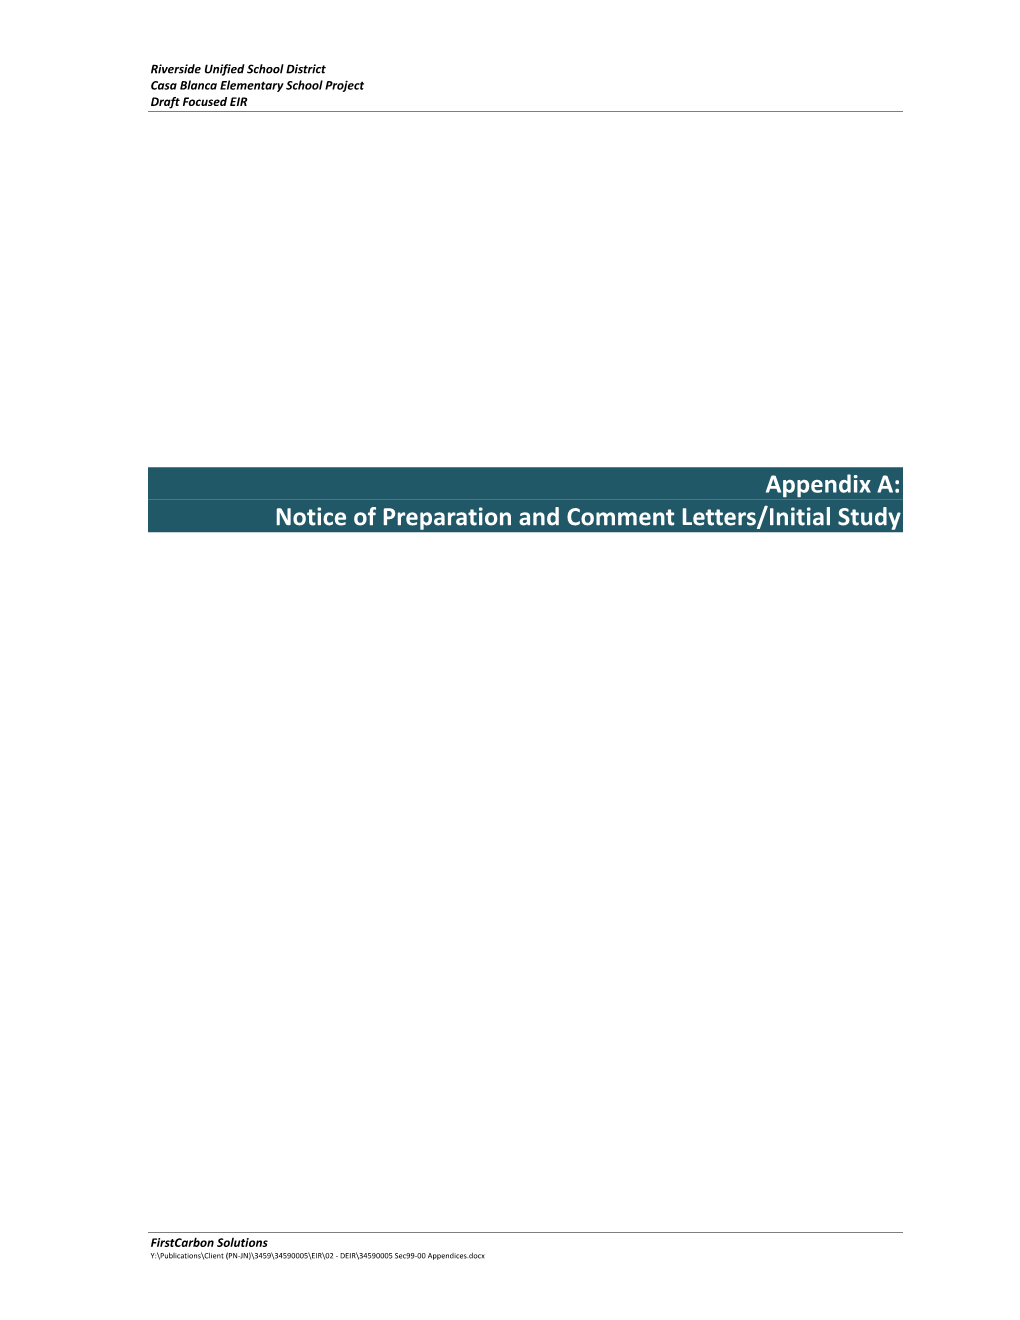 Appendix A: Notice of Preparation and Comment Letters/Initial Study